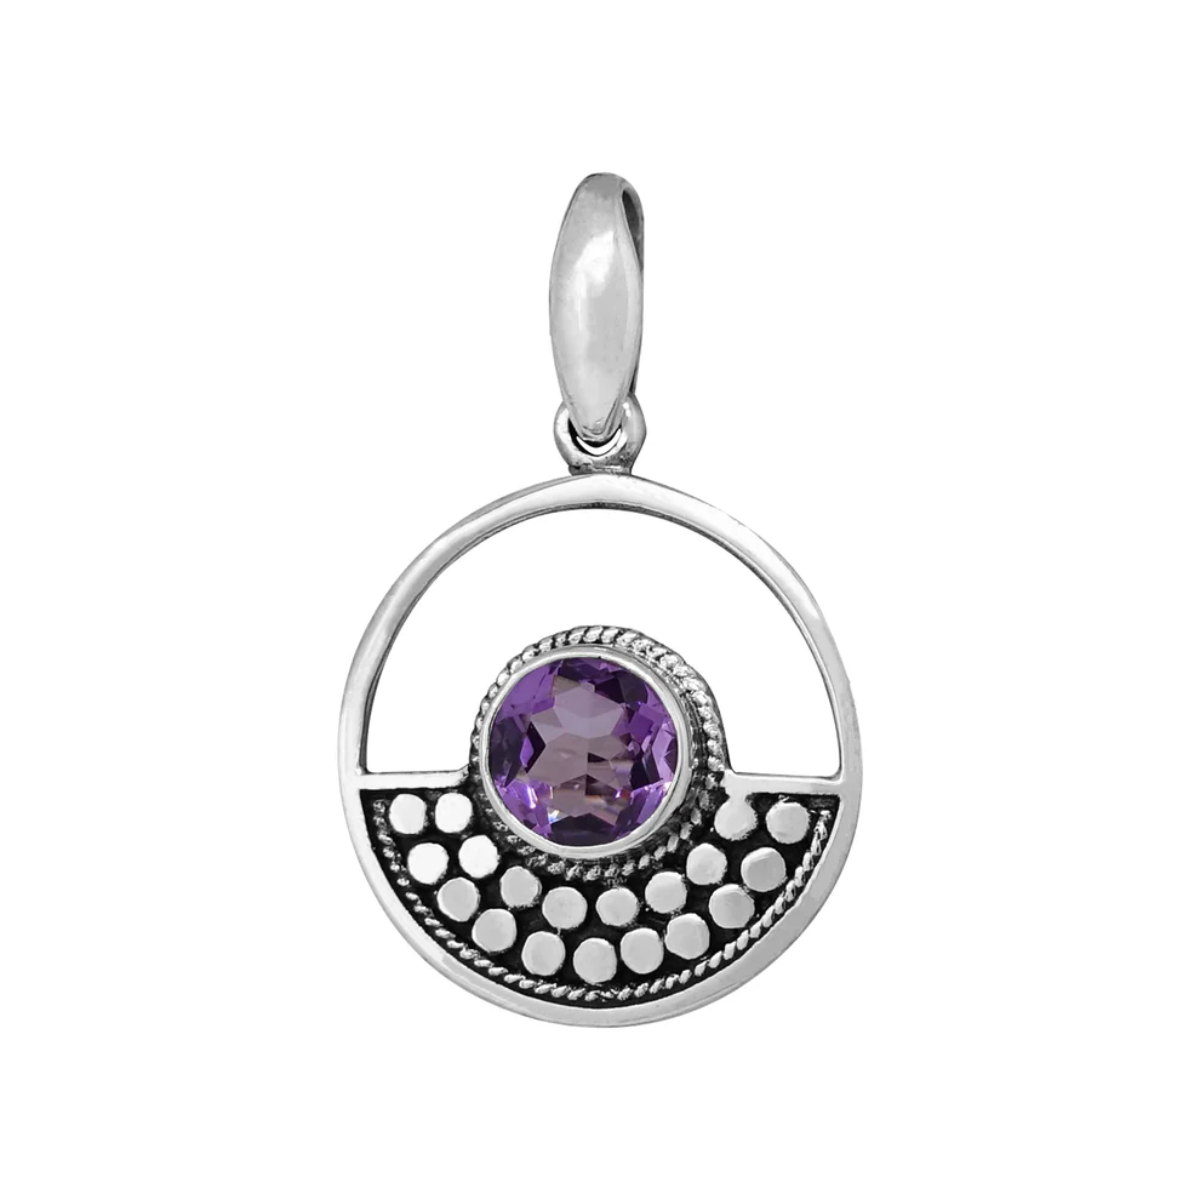 925 Sterling Silver pendant with an amethyst inside. Full circle outline with a dotted bali design half circle within. The gemstone is a small circle in the middle of the whole design